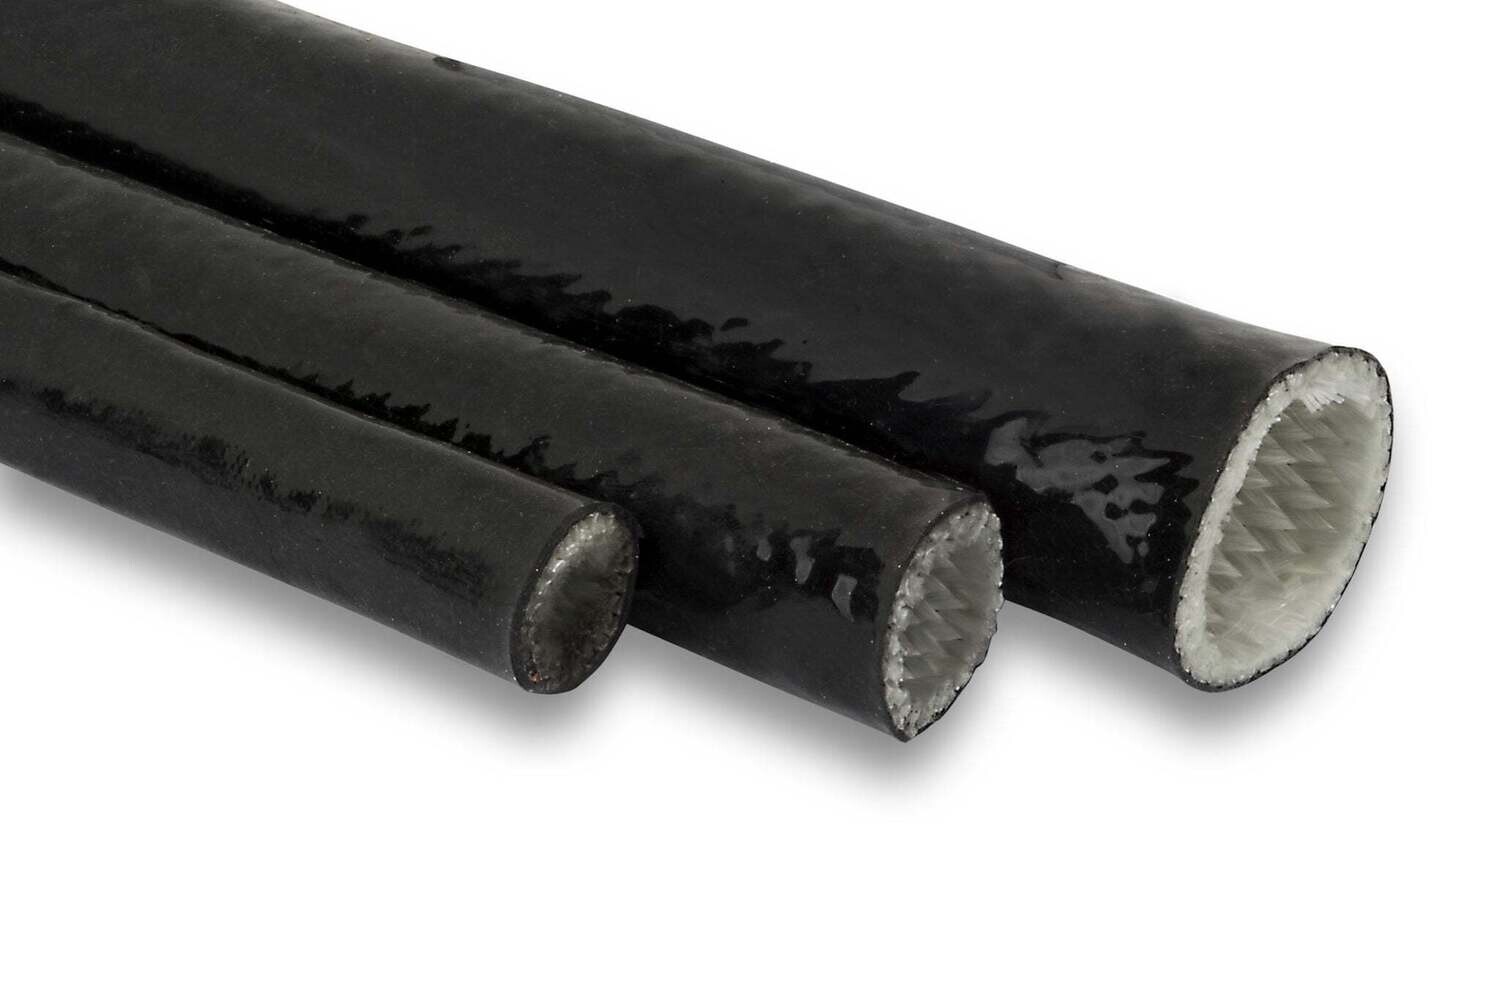 Black Silicon High Heat Sleeve - AN12 (Utilises 20mm Sleeving), 2.0m Multiple Qty will come on a continuous Roll